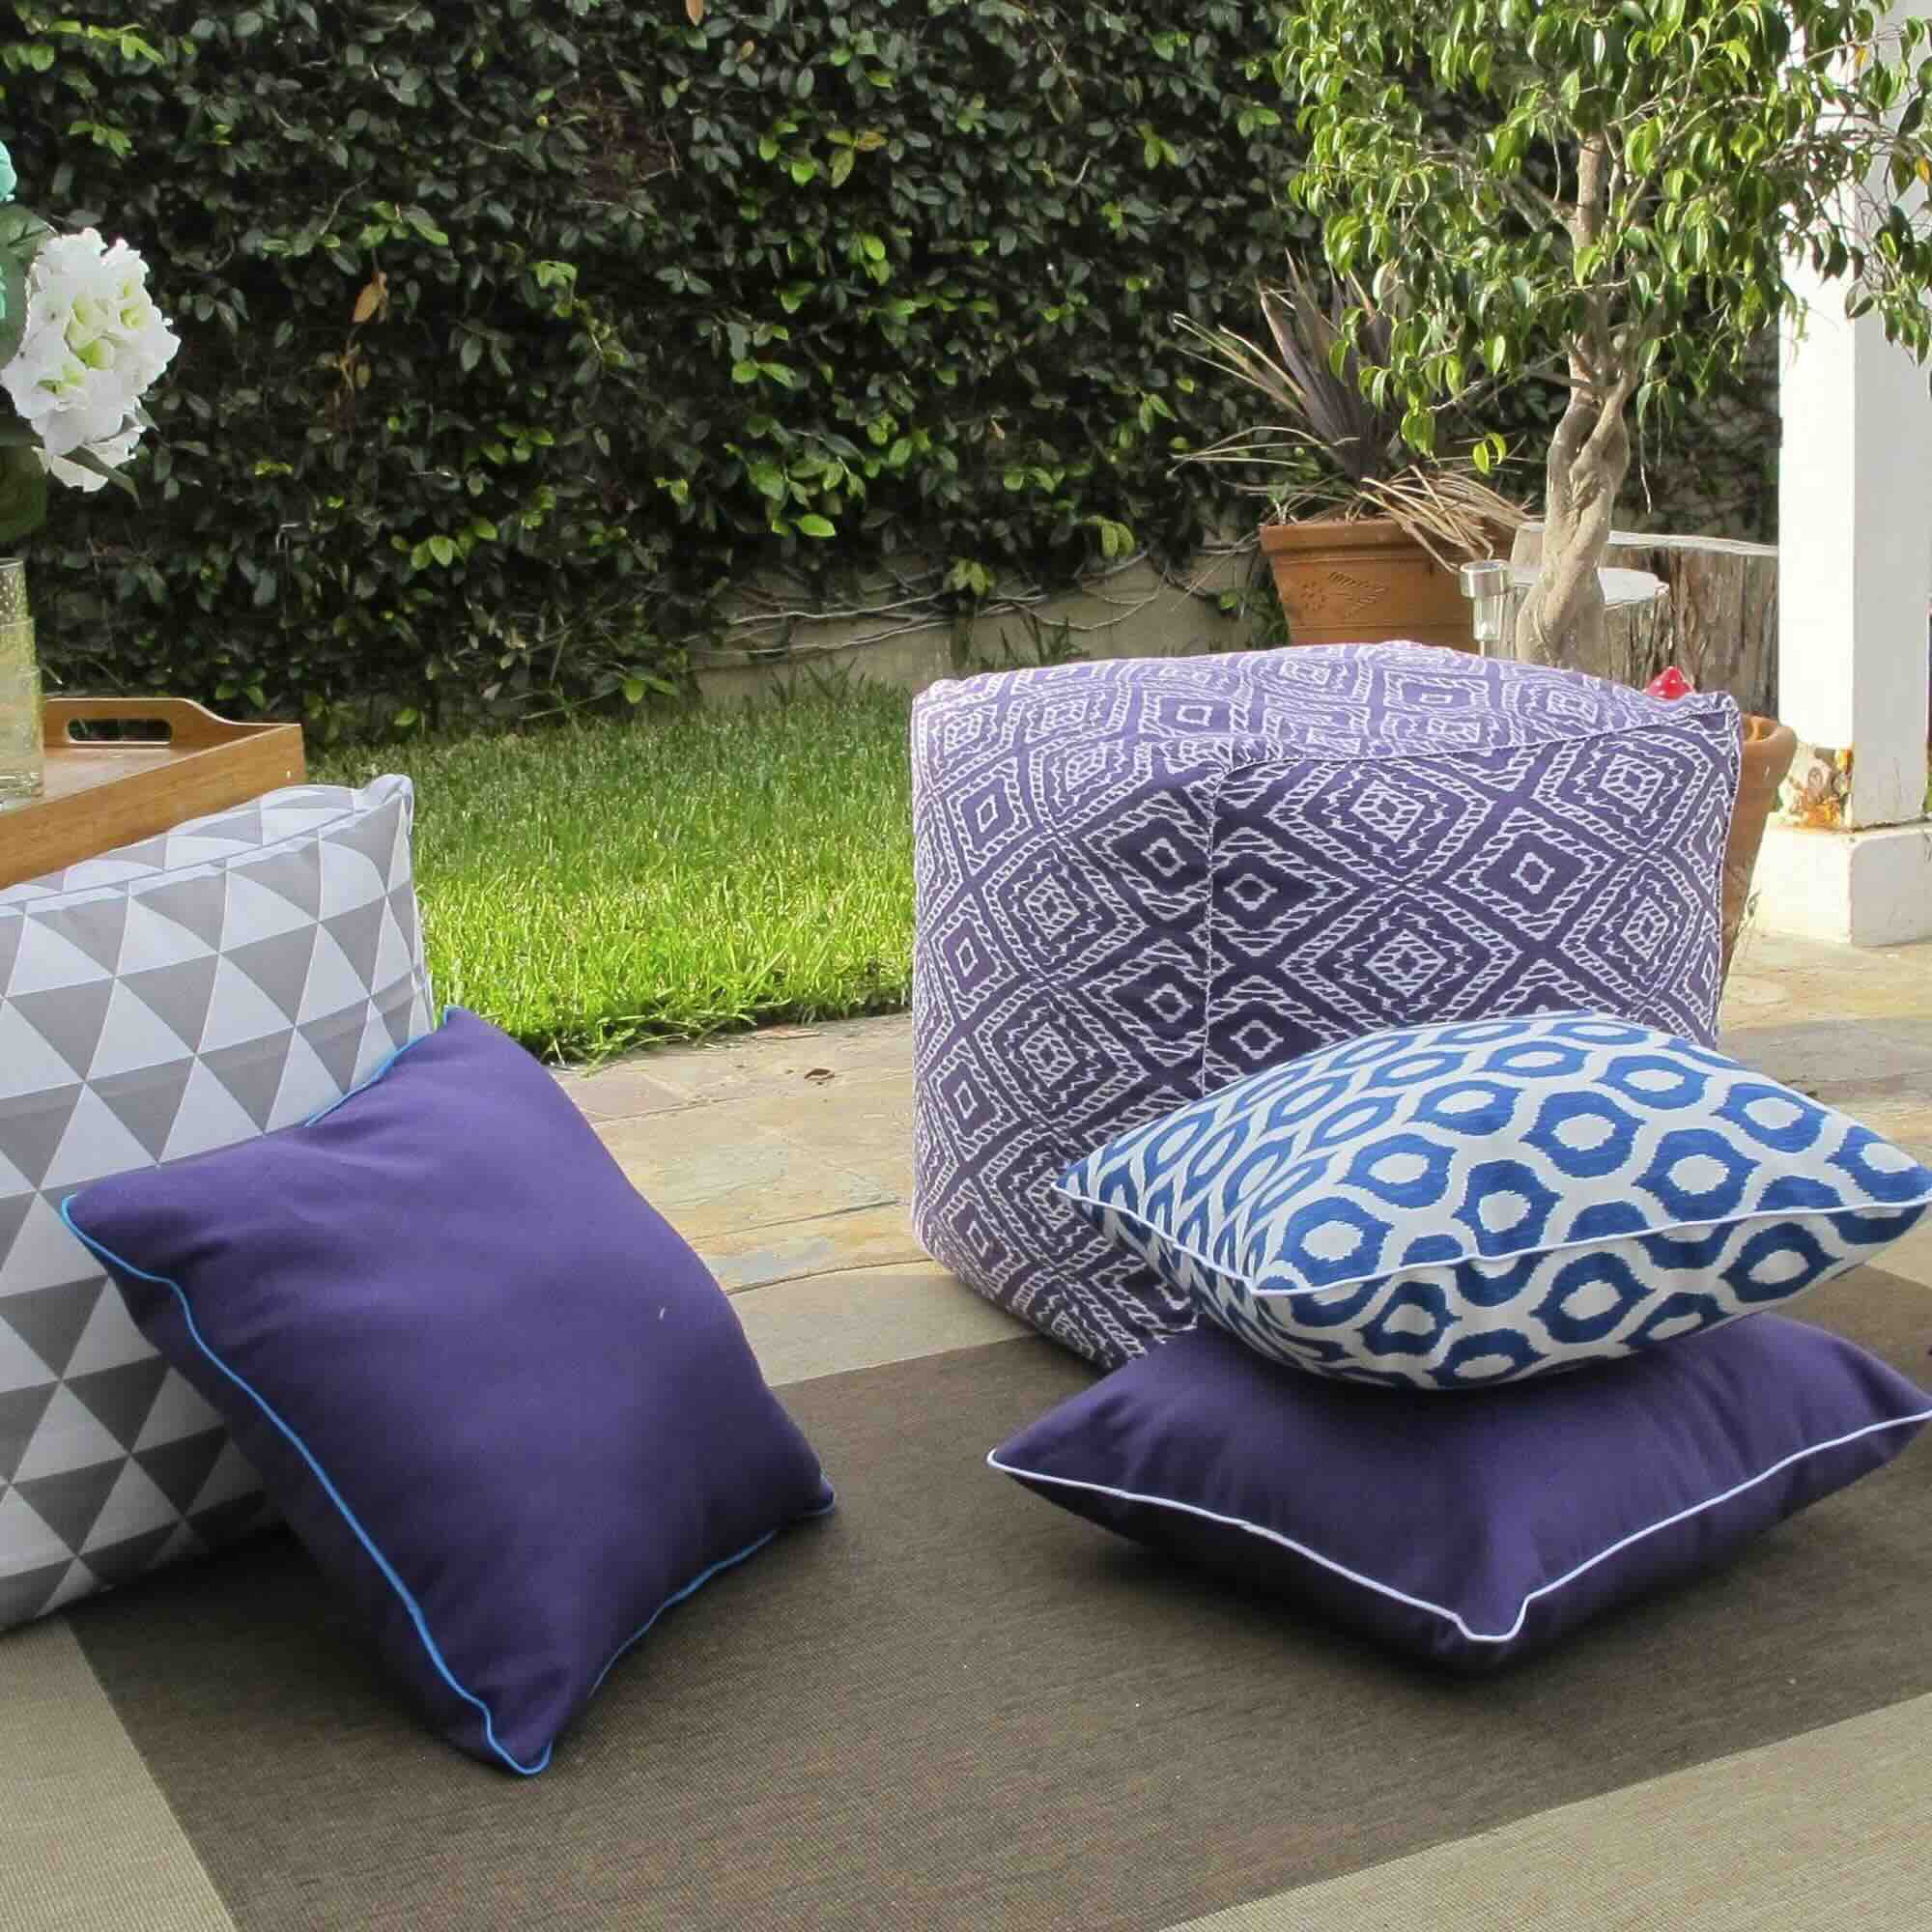 How To Keep Pillows Securely In Place On Outdoor Furniture